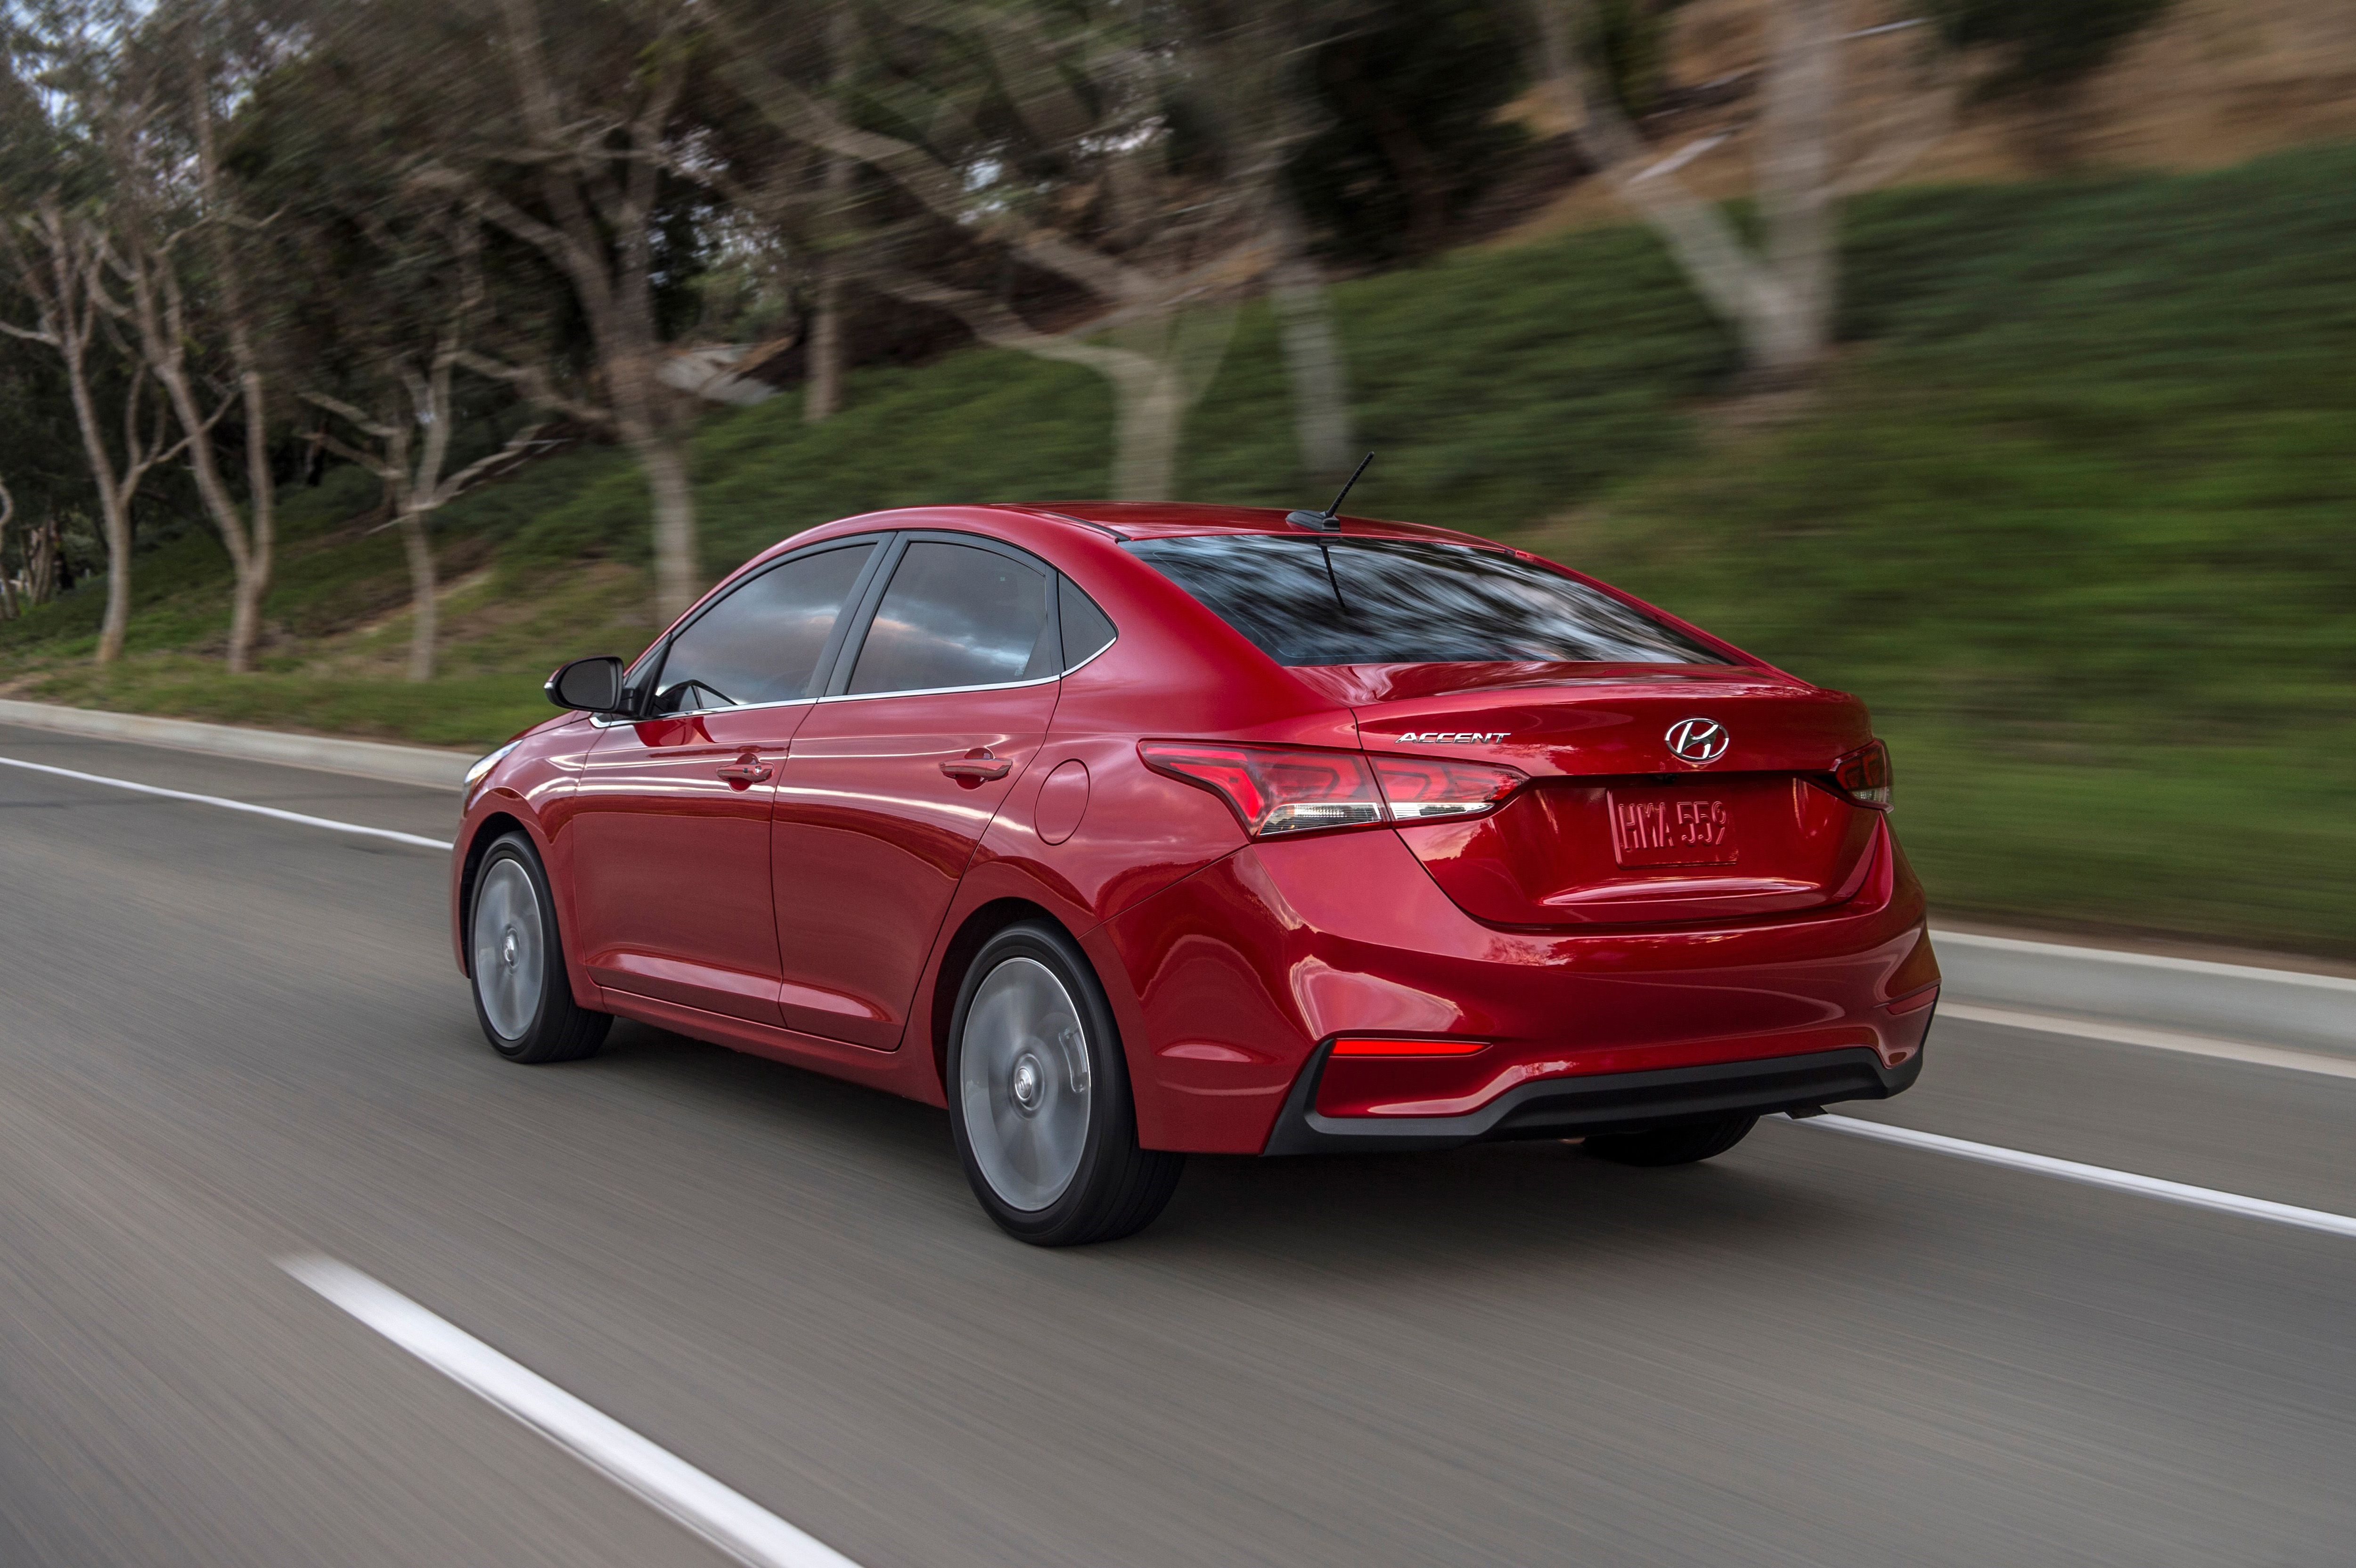 2019 Hyundai Accent Review, Pricing, and Specs